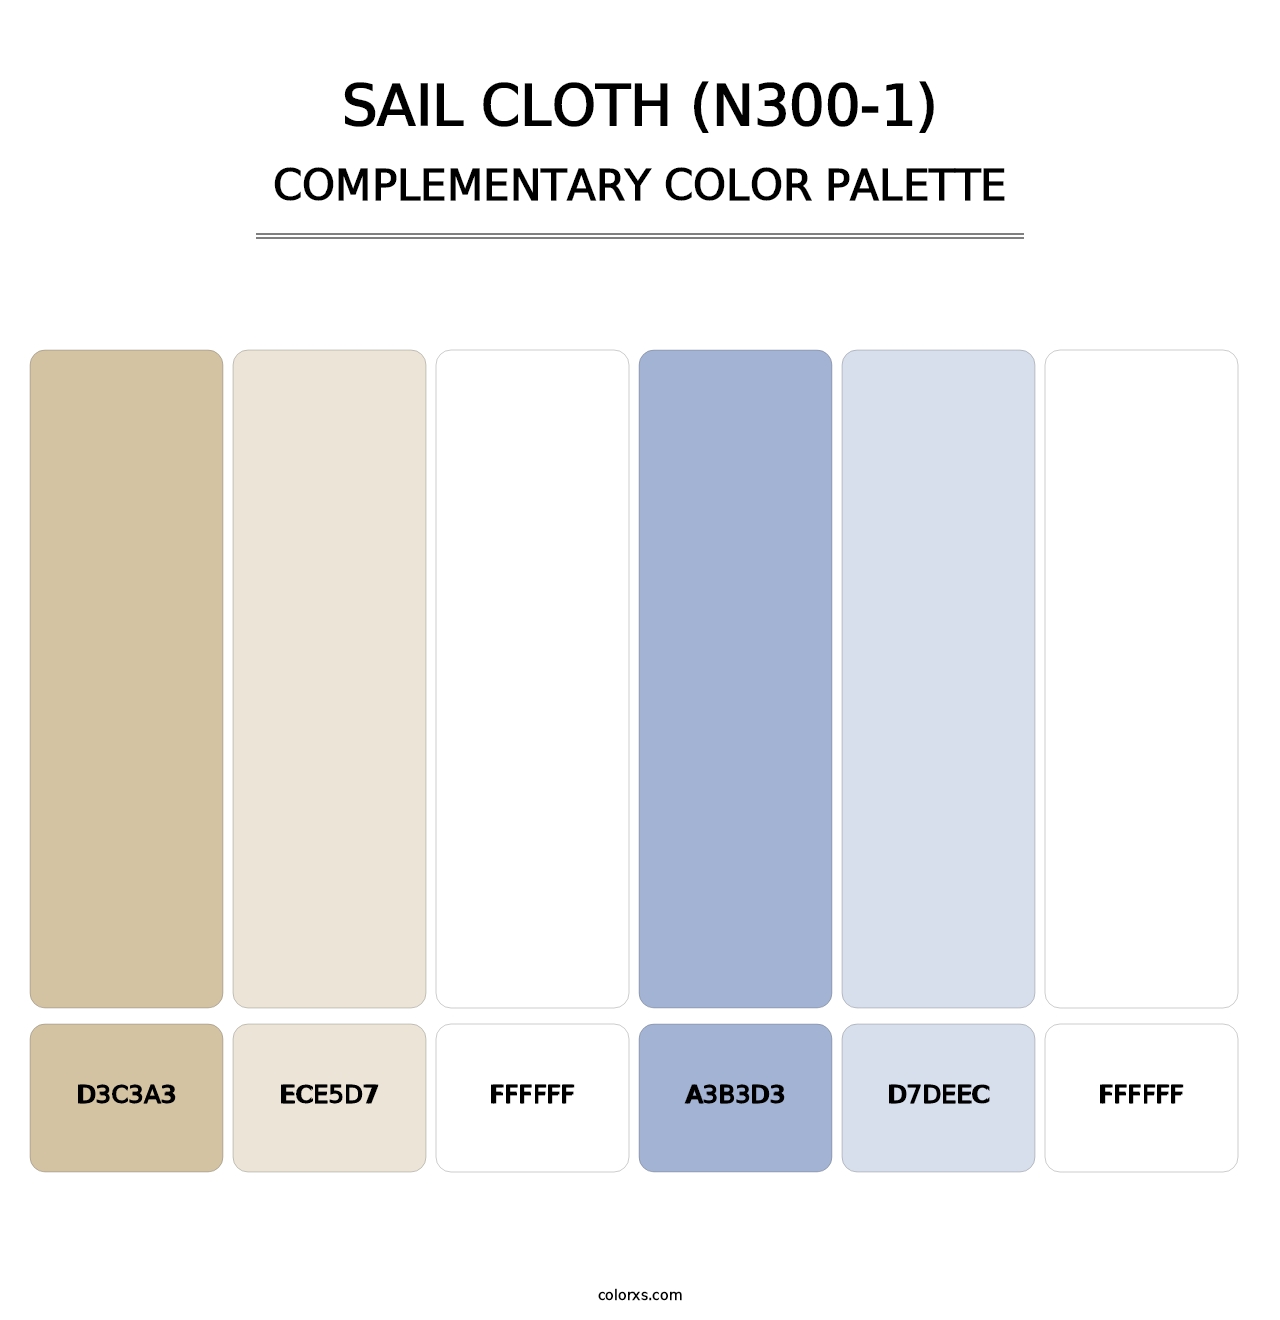 Sail Cloth (N300-1) - Complementary Color Palette